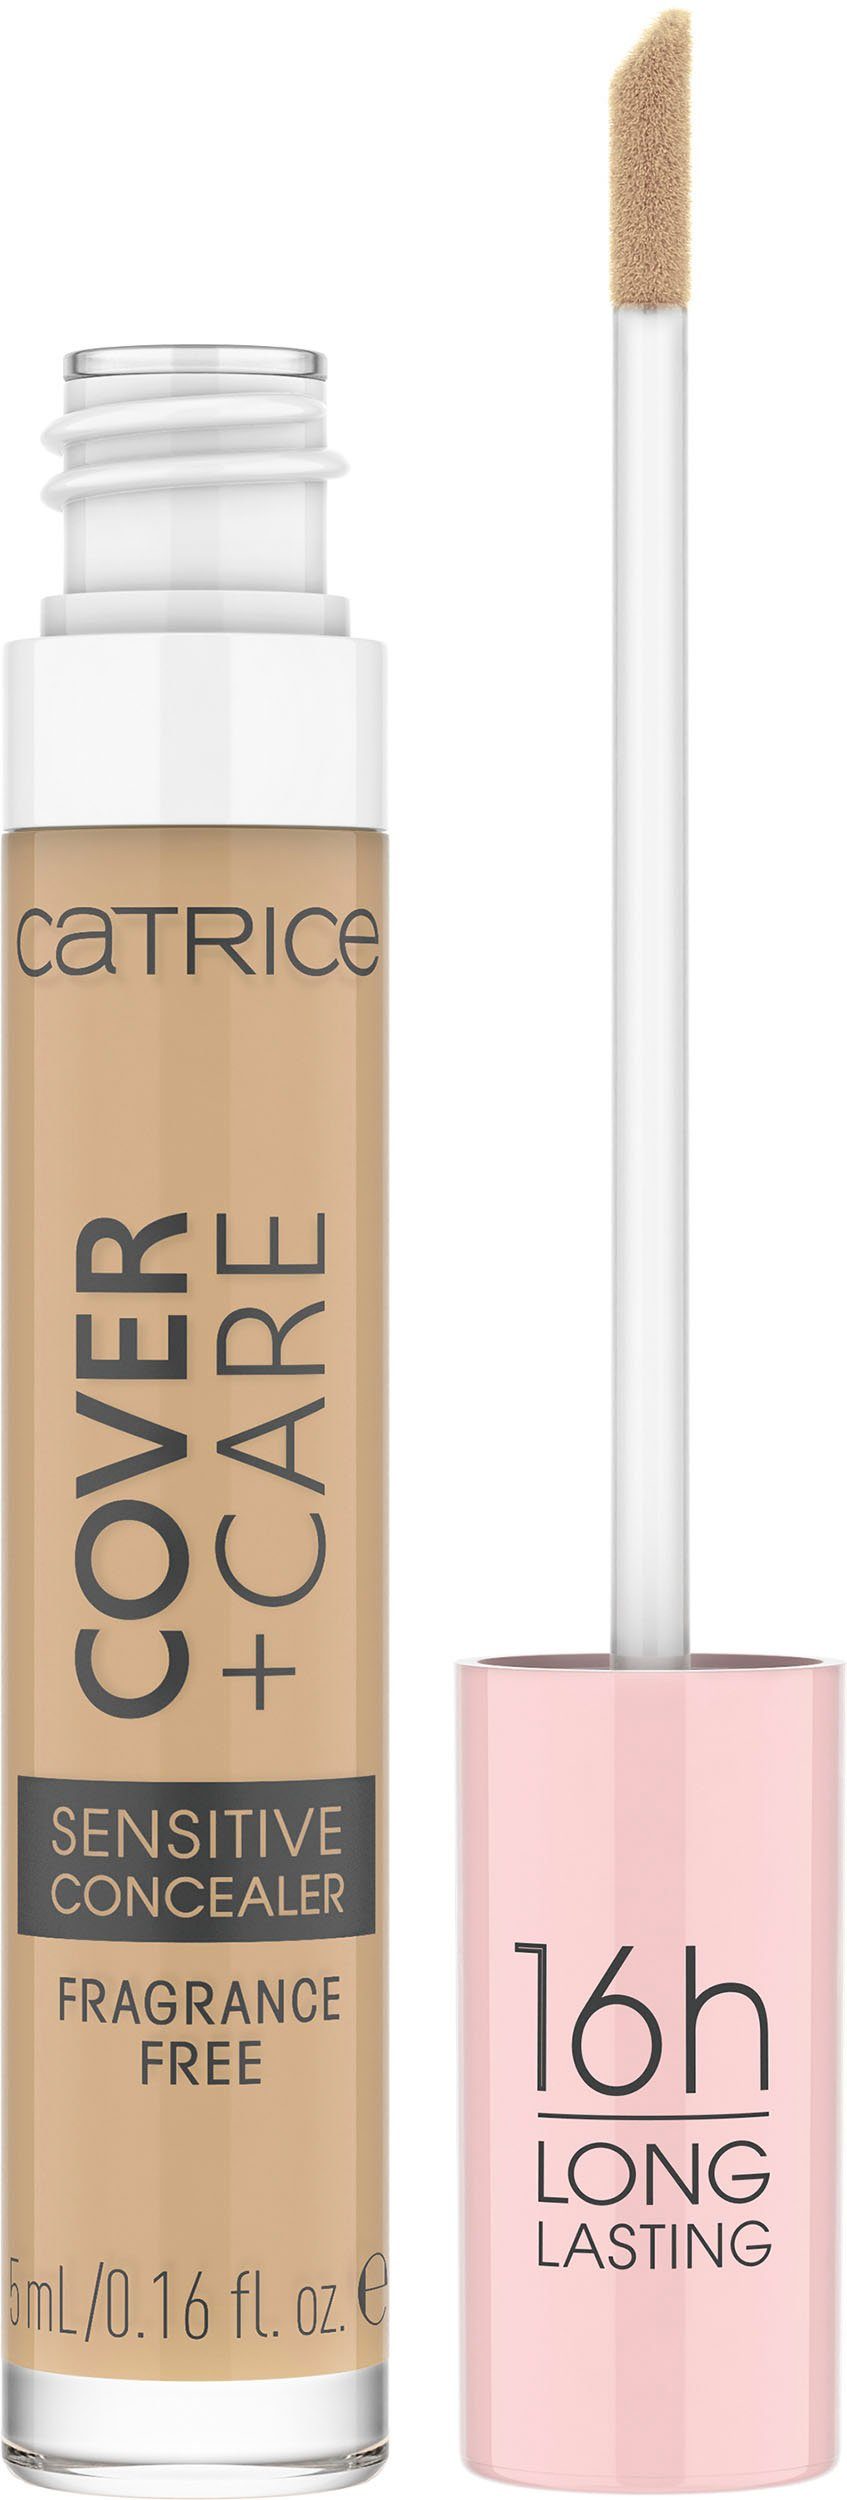 Catrice Concealer Catrice Cover 030N + Care 3-tlg. nude Sensitive Concealer